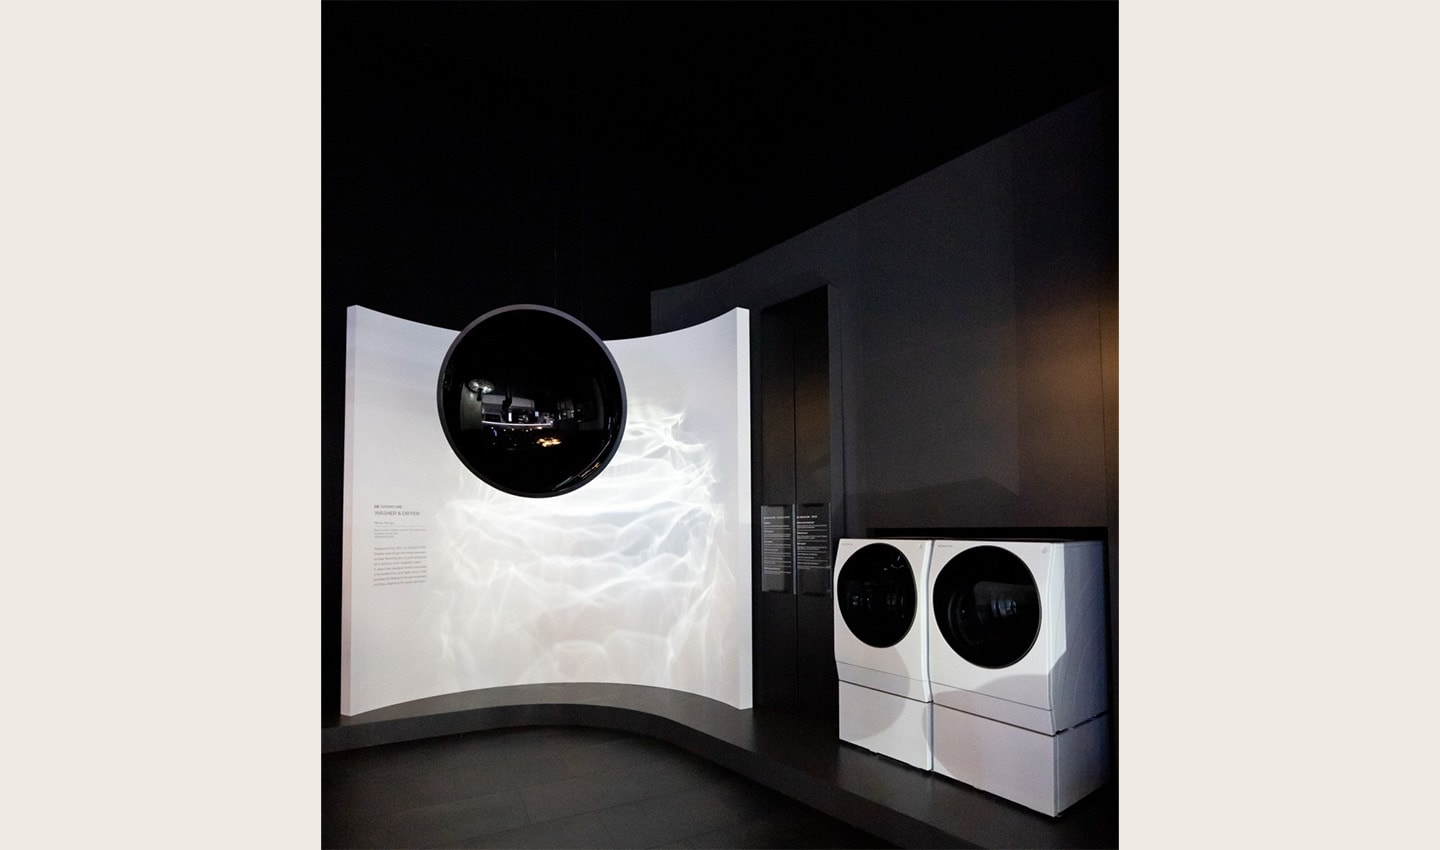 View of a pair of the LG SIGNATURE washer-dryers and a display to the left giving information about their features.